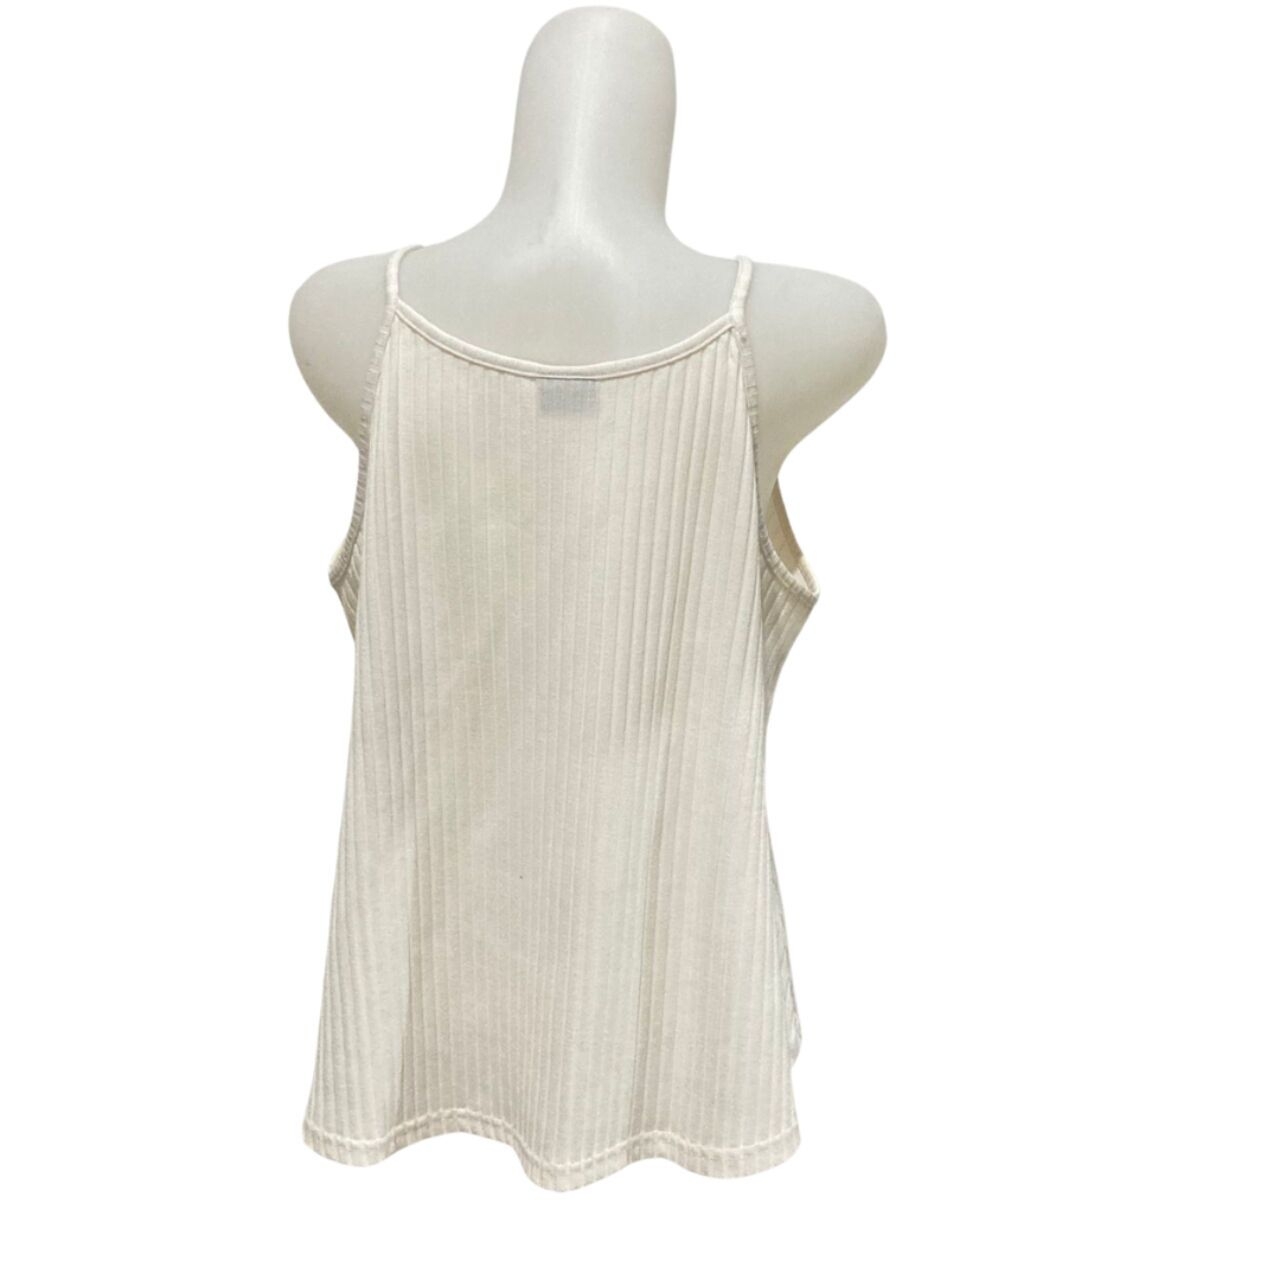 This Is April White Knit Top